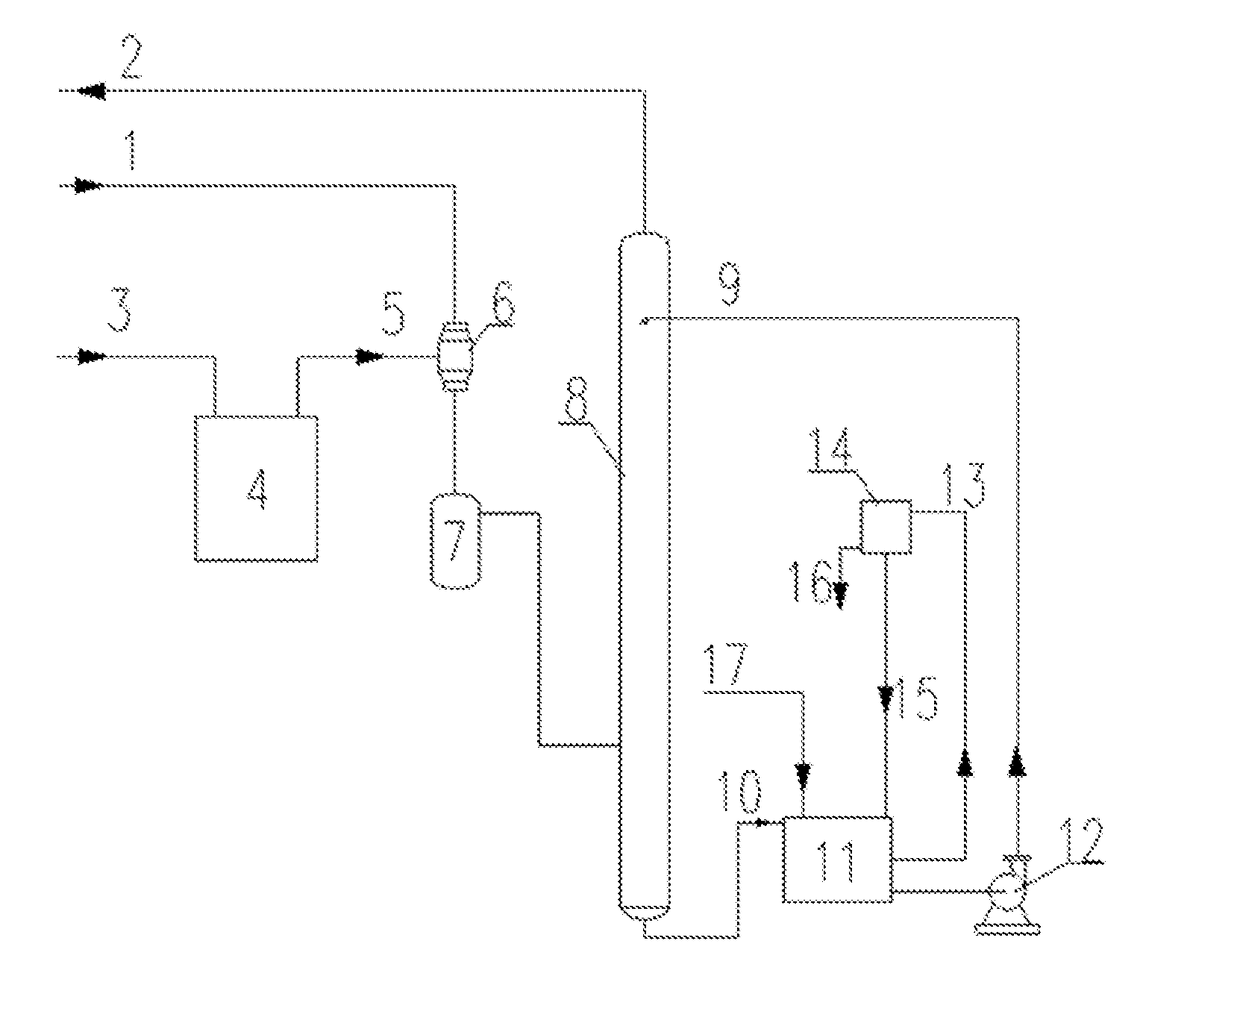 Gas denitration process and apparatus